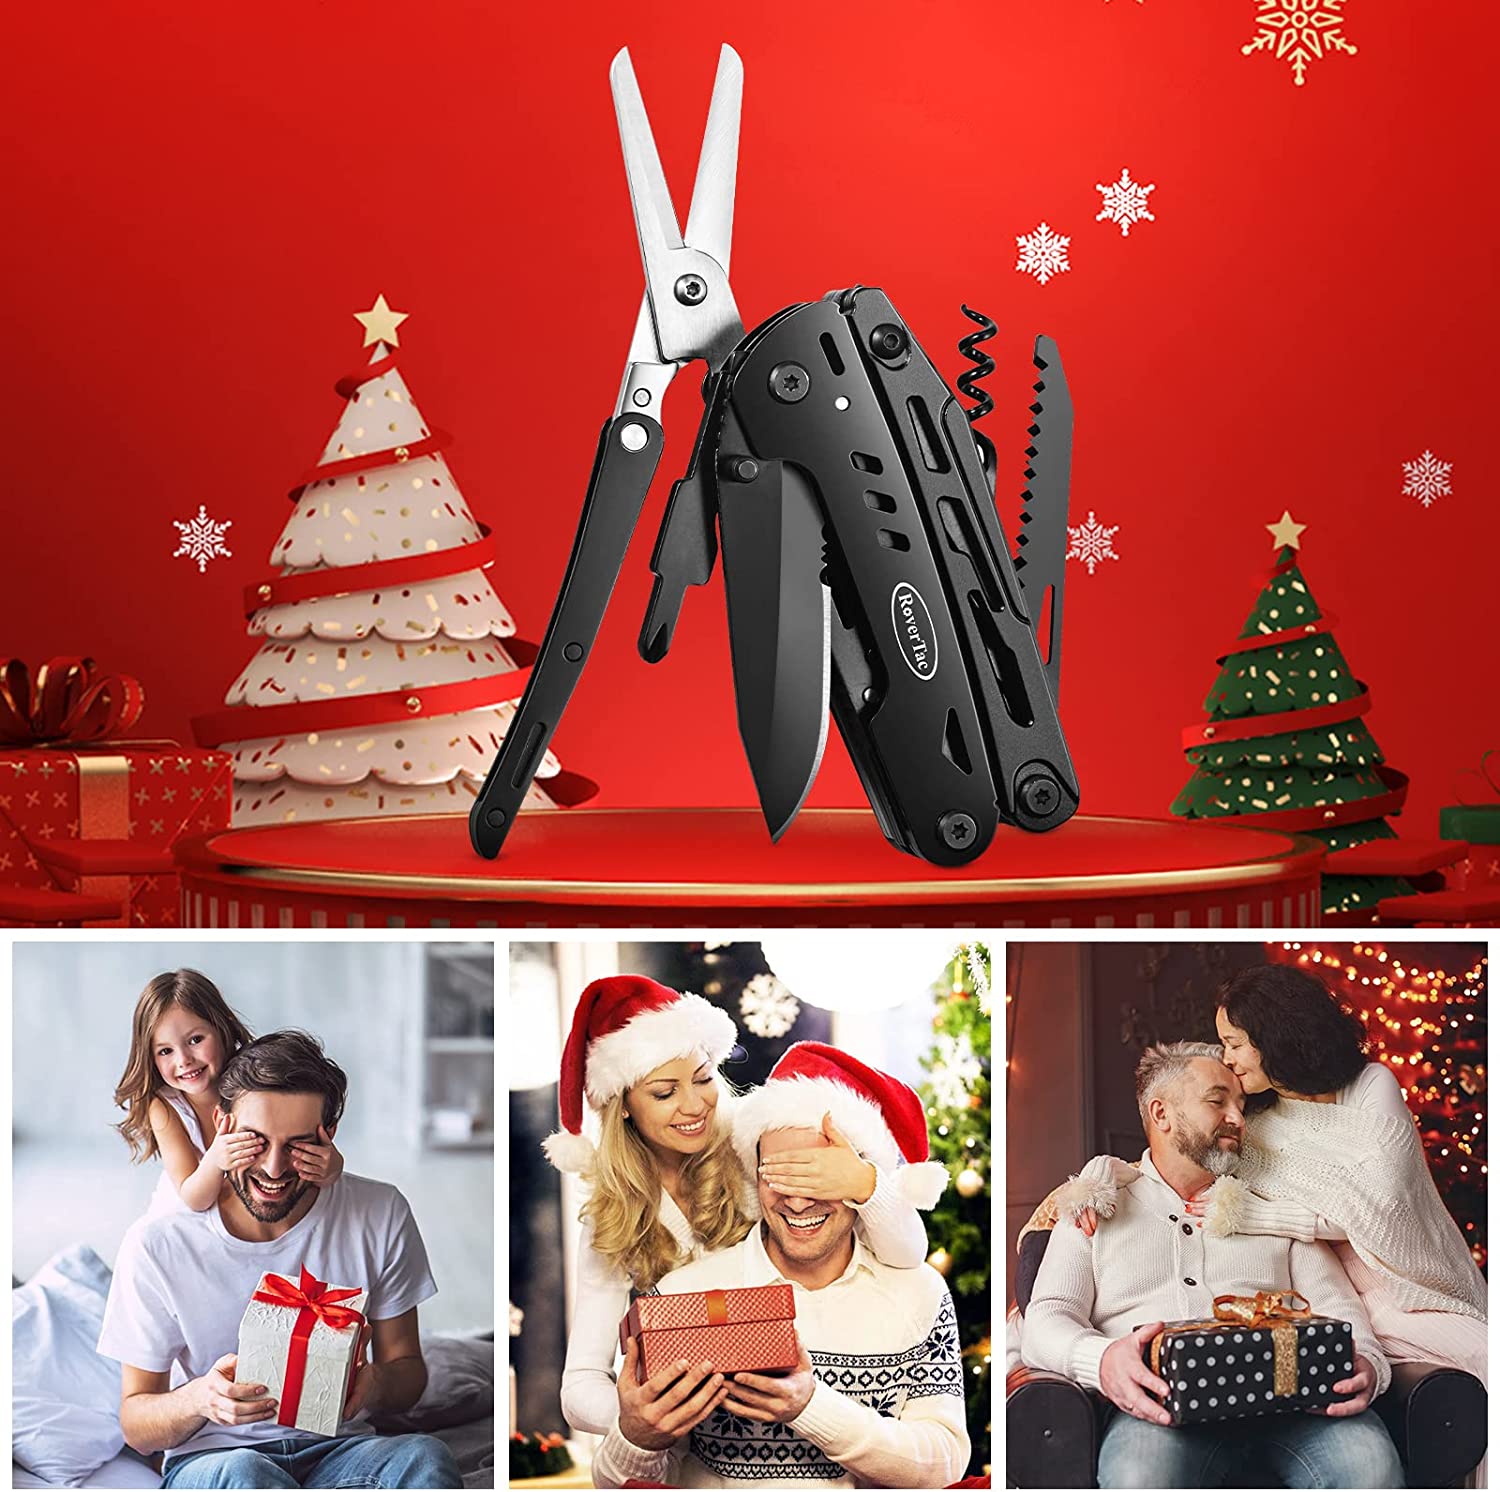 18-in-1 Multi-functional Pliers Pocket Knife Camping Tool Gifts for Men